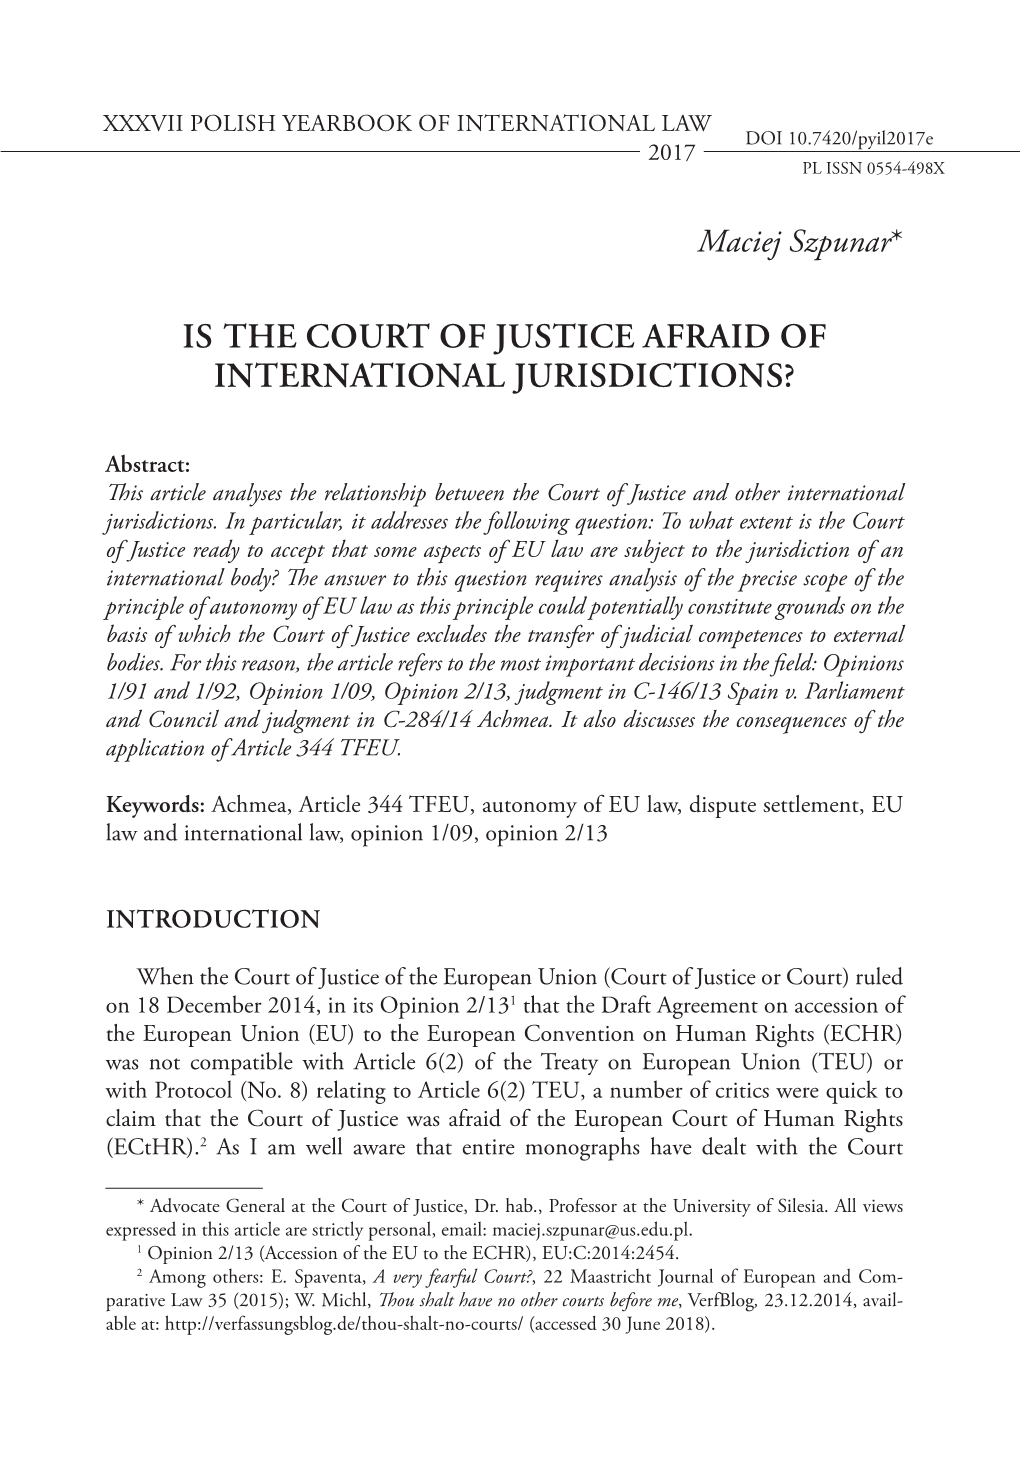 Is the Court of Justice Afraid of International Jurisdictions?